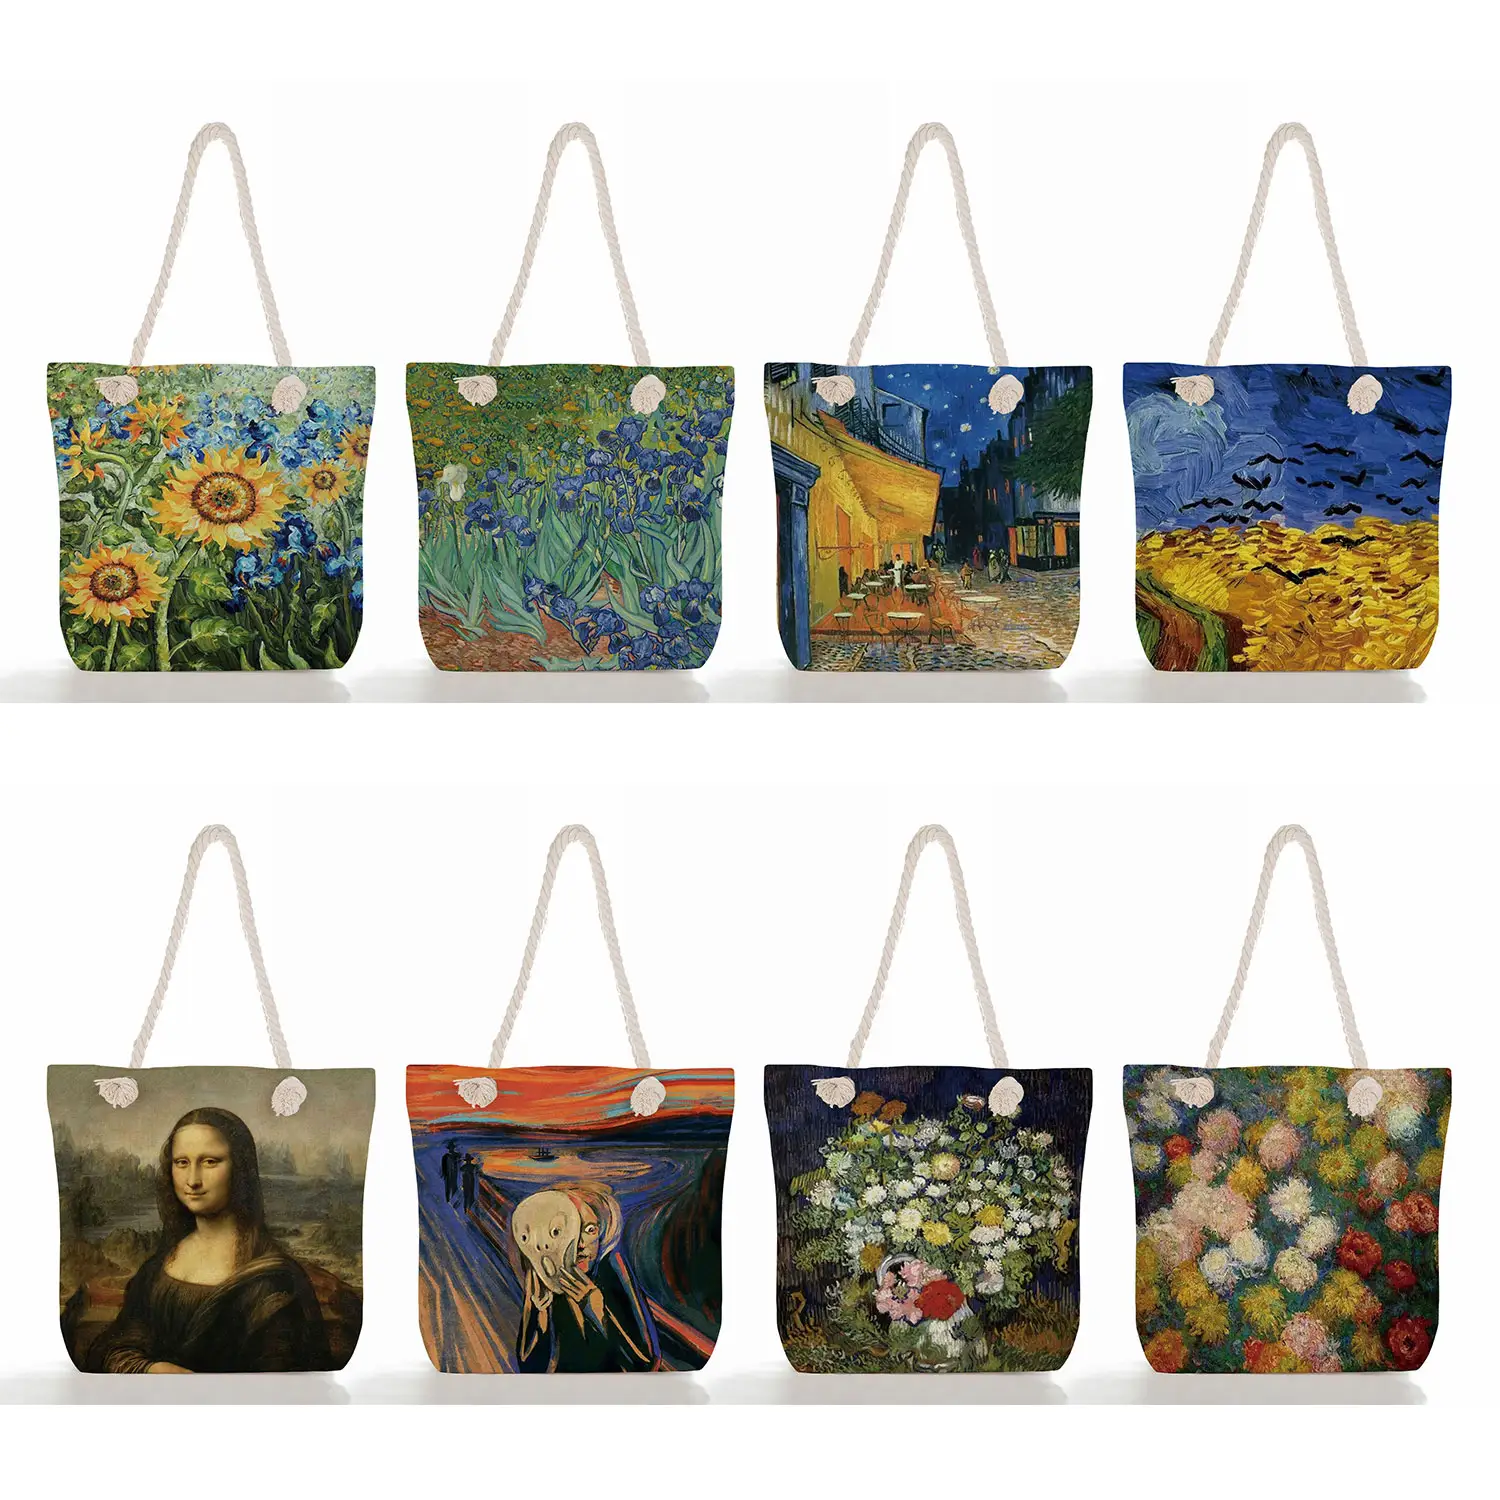 Customized Logo Picture Thick Rope Tote High Quality Foldable Reusable Handbag New Van Gogh Oil Painting Print Travel Beach Bags